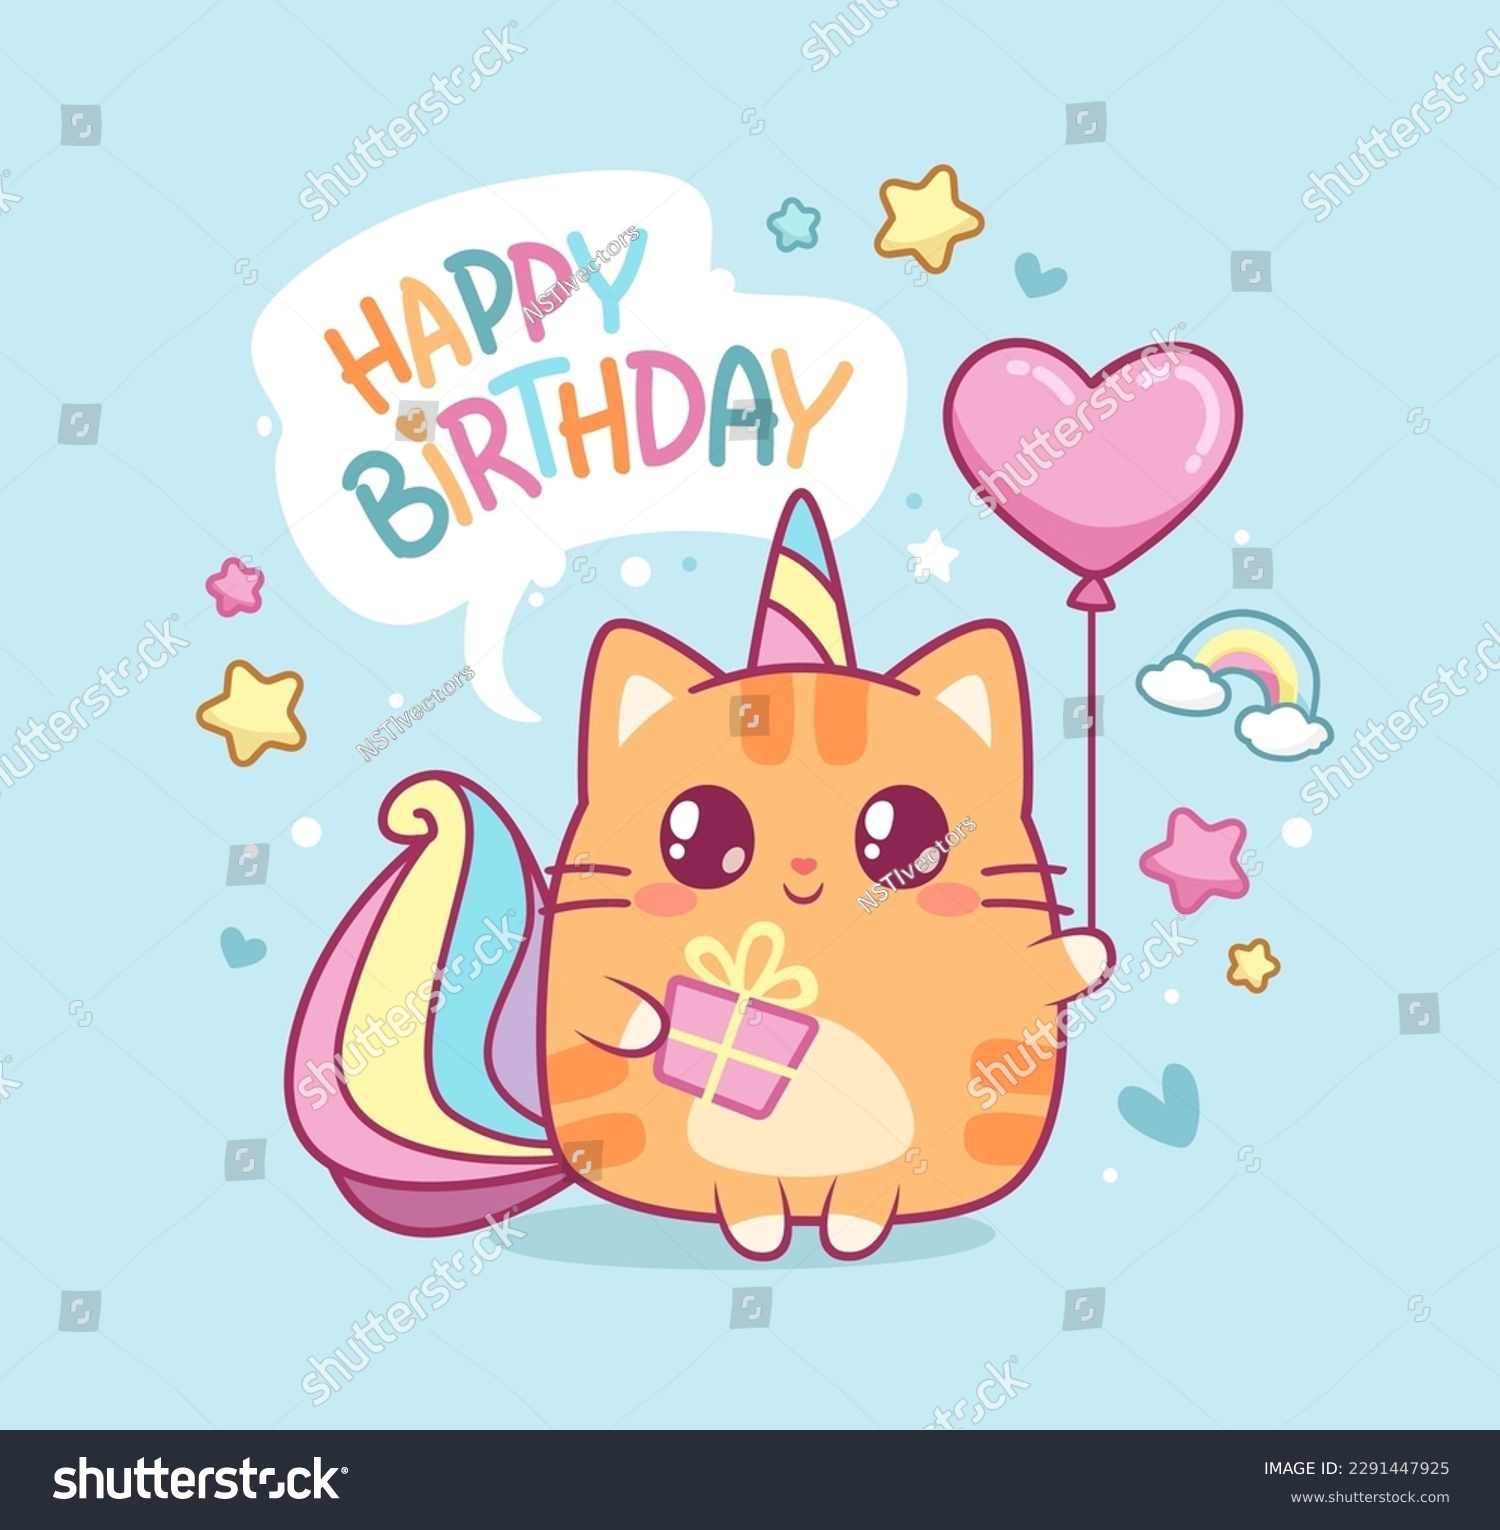 SVG of Happy Birthday Card concept with cute cat or  caticorn baby in kawaii style. Baby kitten Unicorn says  Happy Birthday on greeting card design. Vector templae svg